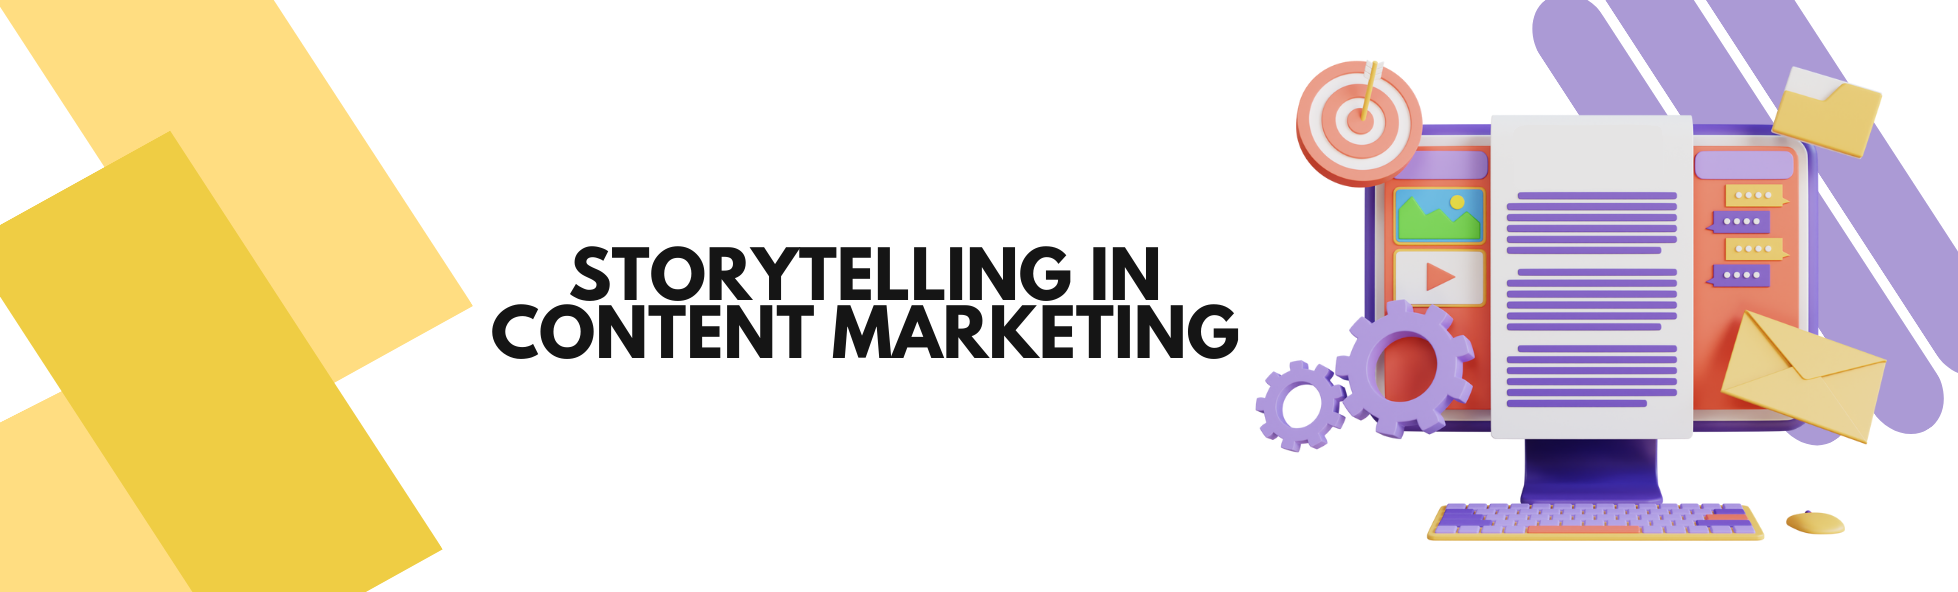 the importance of storytelling in content marketing